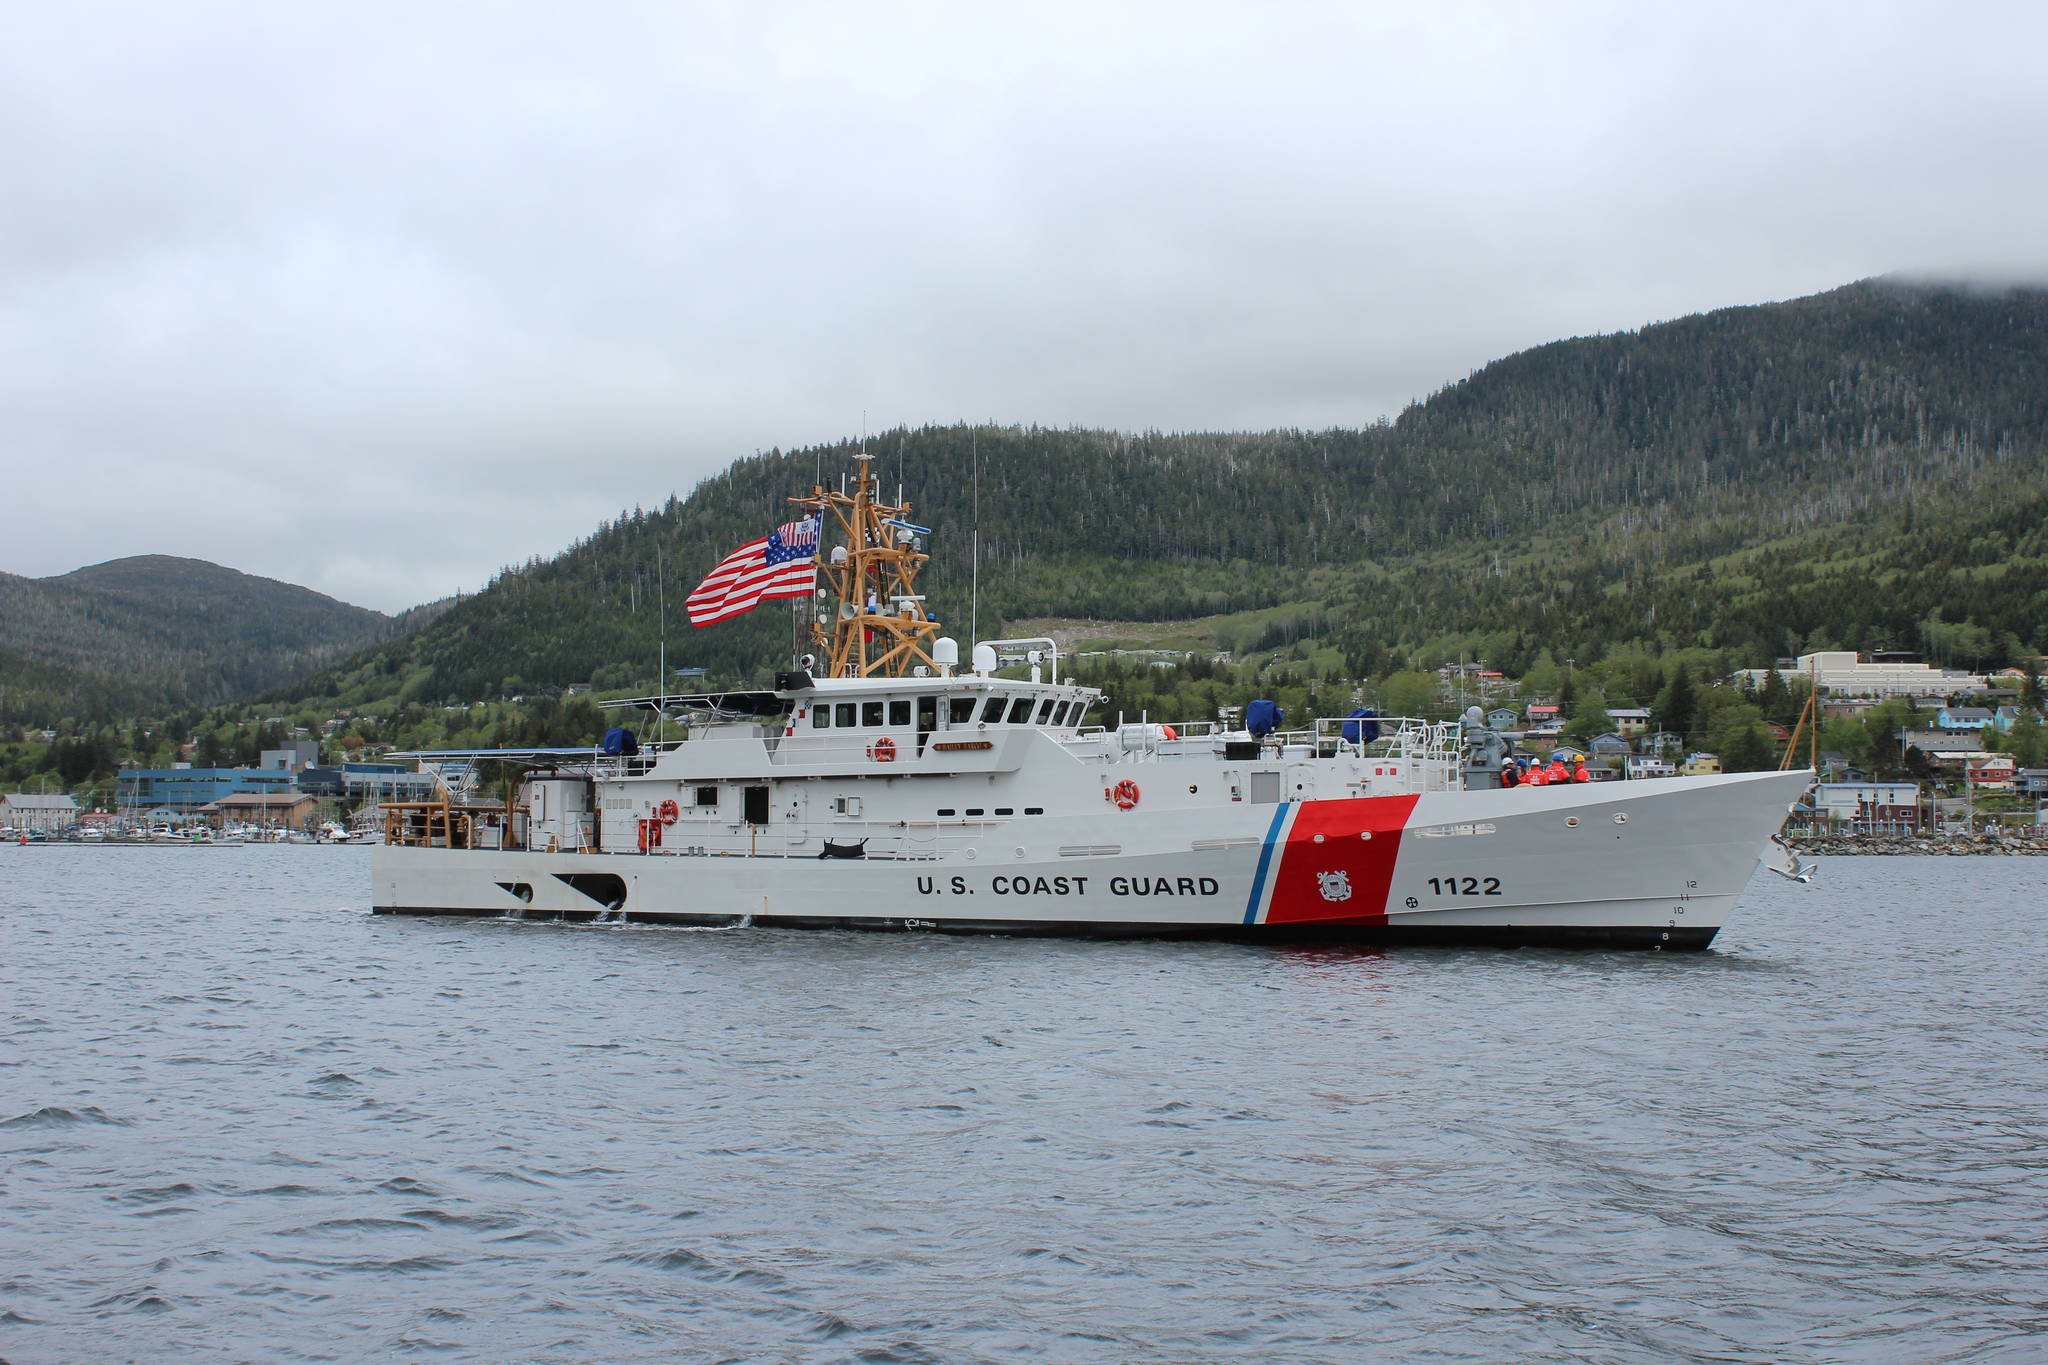 The CGC Bailey Barco pulls into its home port of Ketchikan on May 12 ,2017. The vessel, just the second Fast Response Cutter to be stationed in Alaska, was commissioned in Juneau on June 14, 2017. City officials are hoping that the Coast Guard will select Juneau as a spot for a future cutter. (Courtesy photo | U.S. Coast Guard)